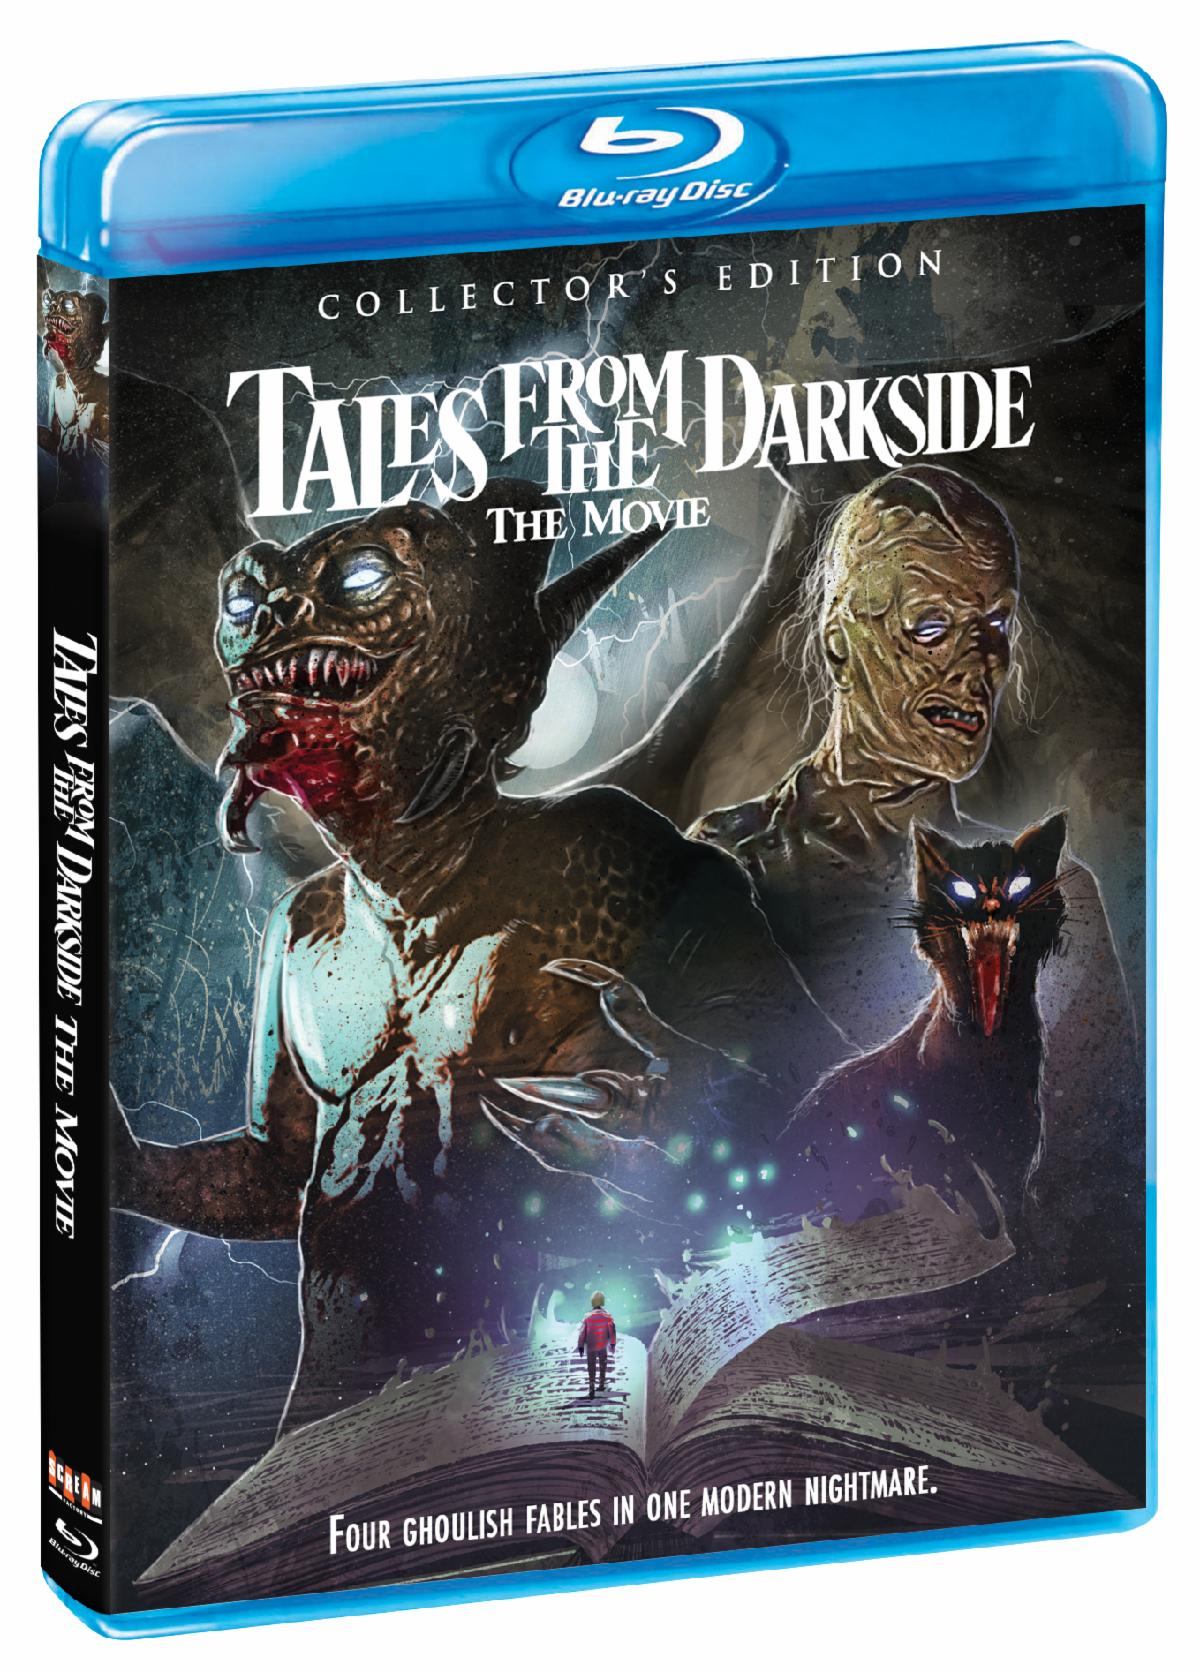 Tales from the Darkside: The Movie. (Collector’s Edition)